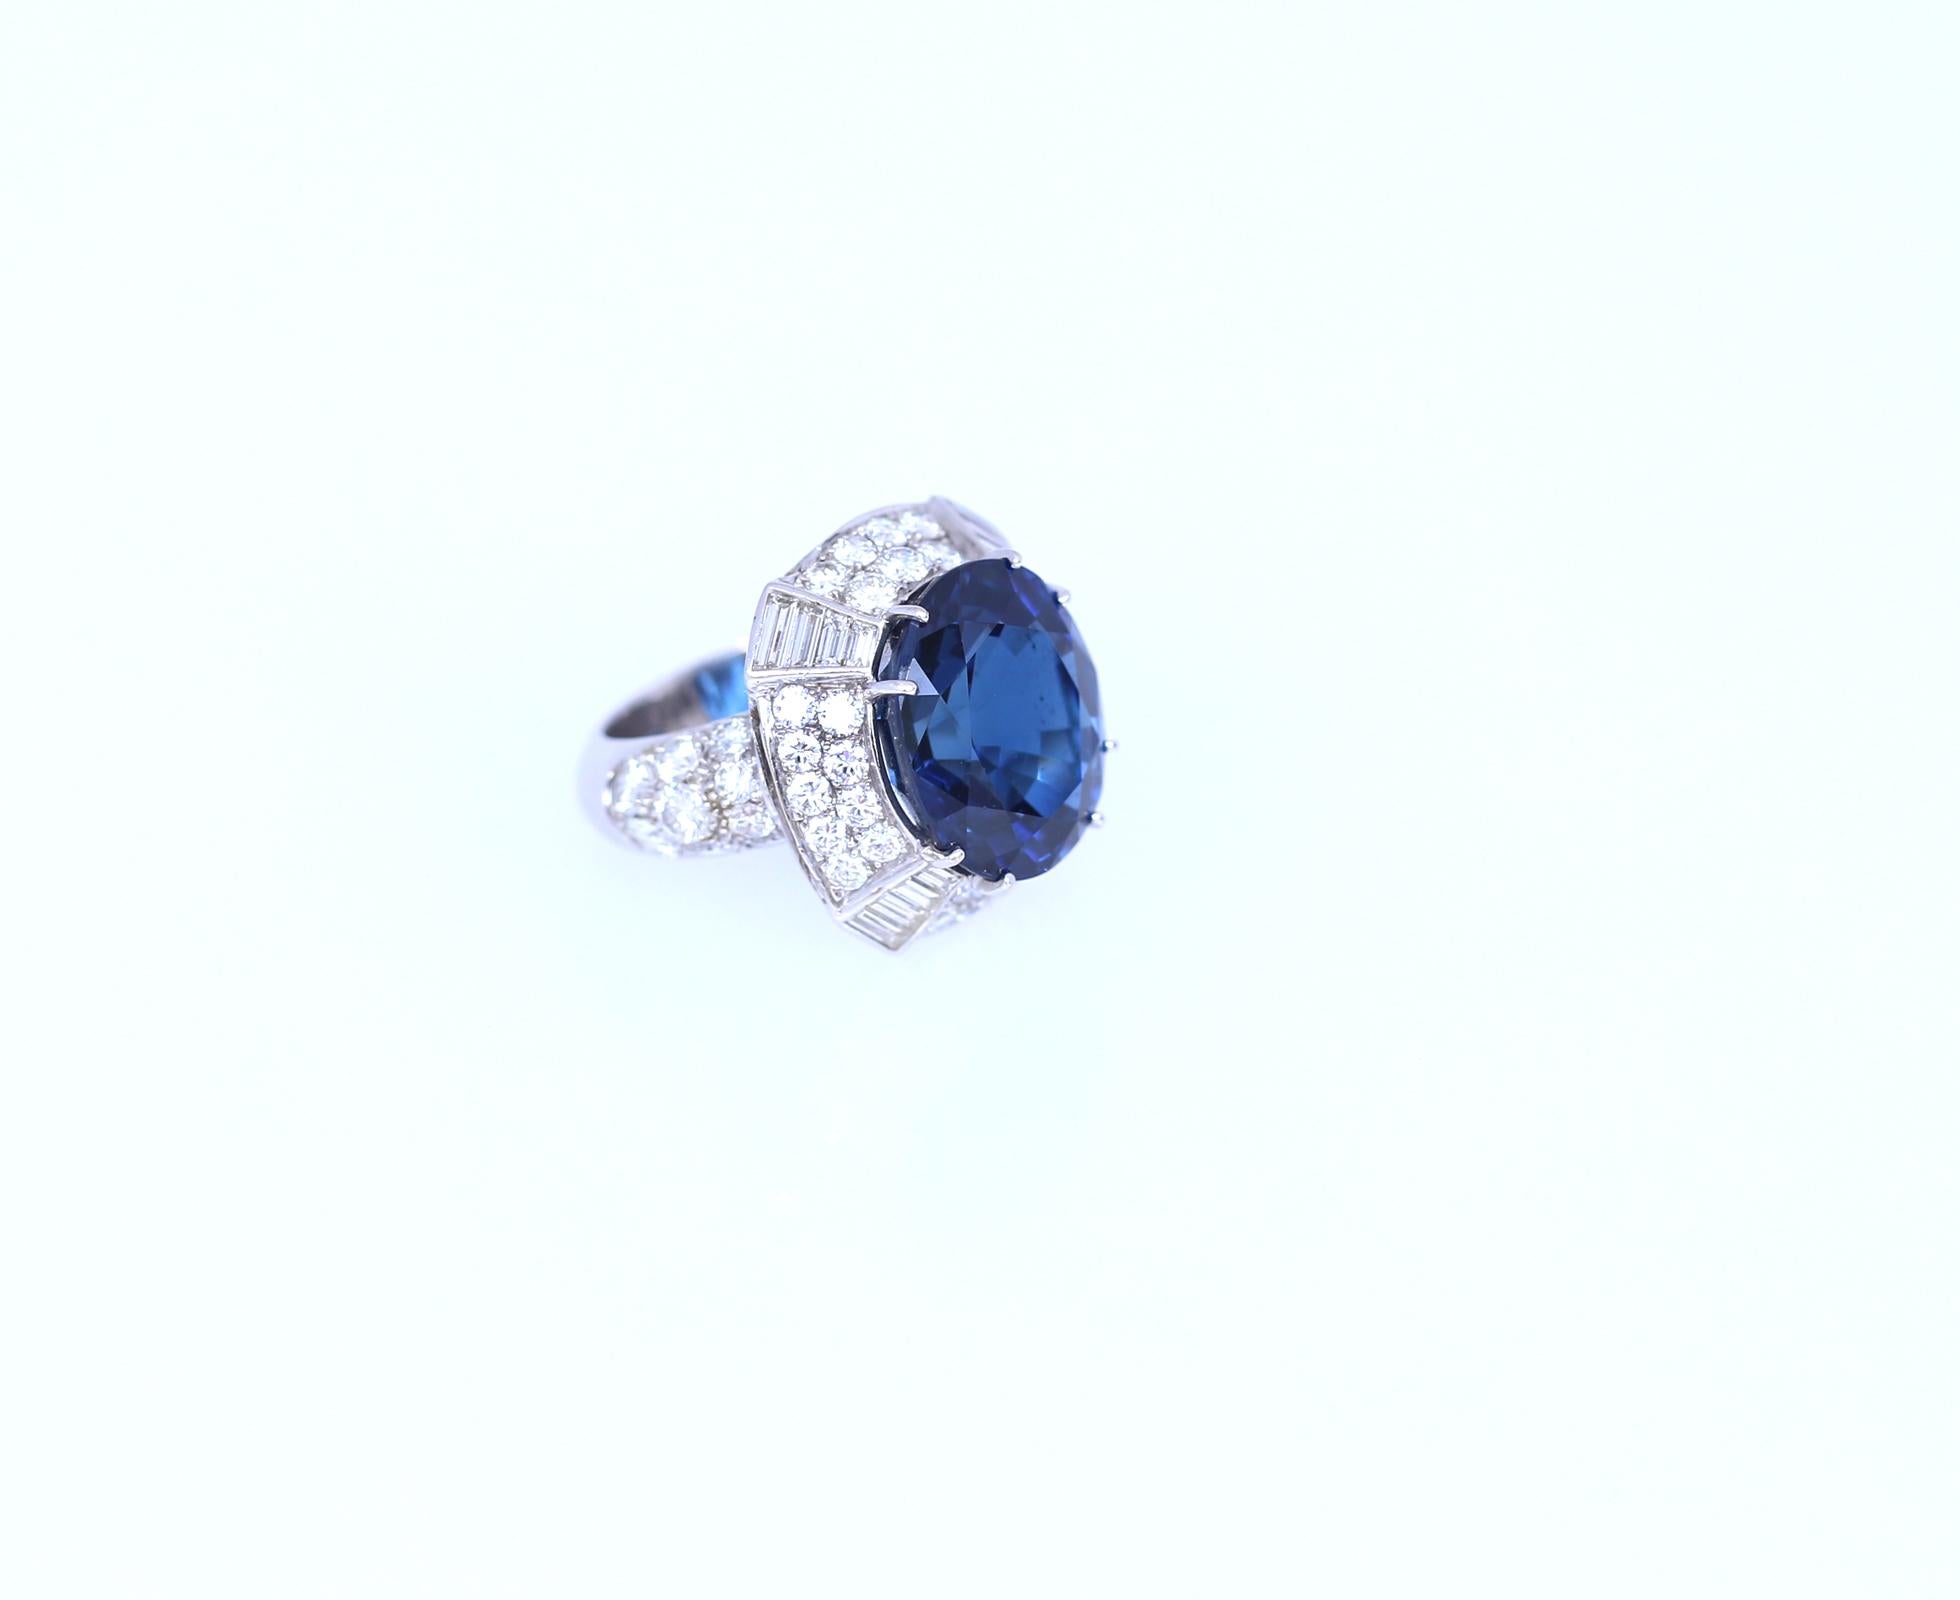 Certified Natural Sapphire Diamond Ring
Magnificent and important natural Sapphire and Diamonds ring. Holds a Certificate of the SGL (Swiss Gem Lab) stating:

Natural Sapphire weighing 14.6 Carats.
50 Diamonds with a total weight of 3.56 Carats.
18